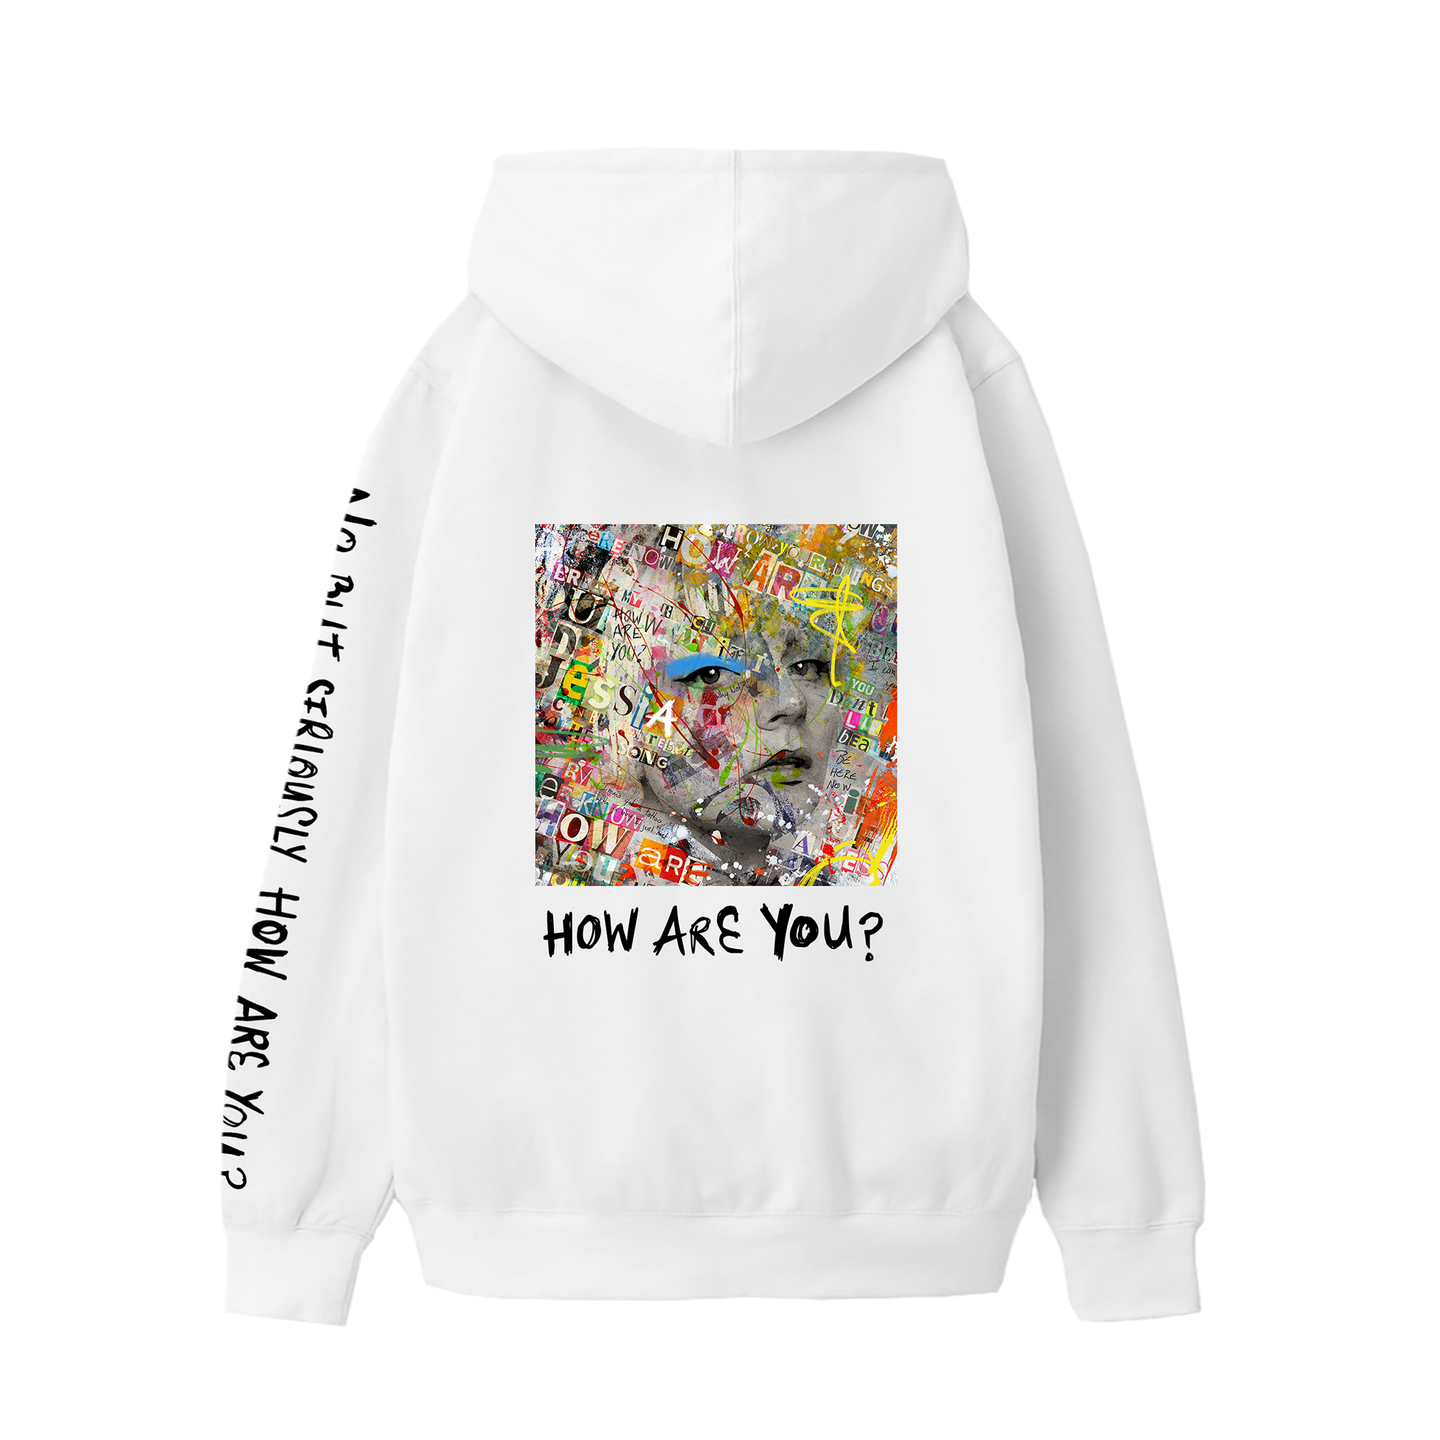 How Are You? EP Art Hoodie - White